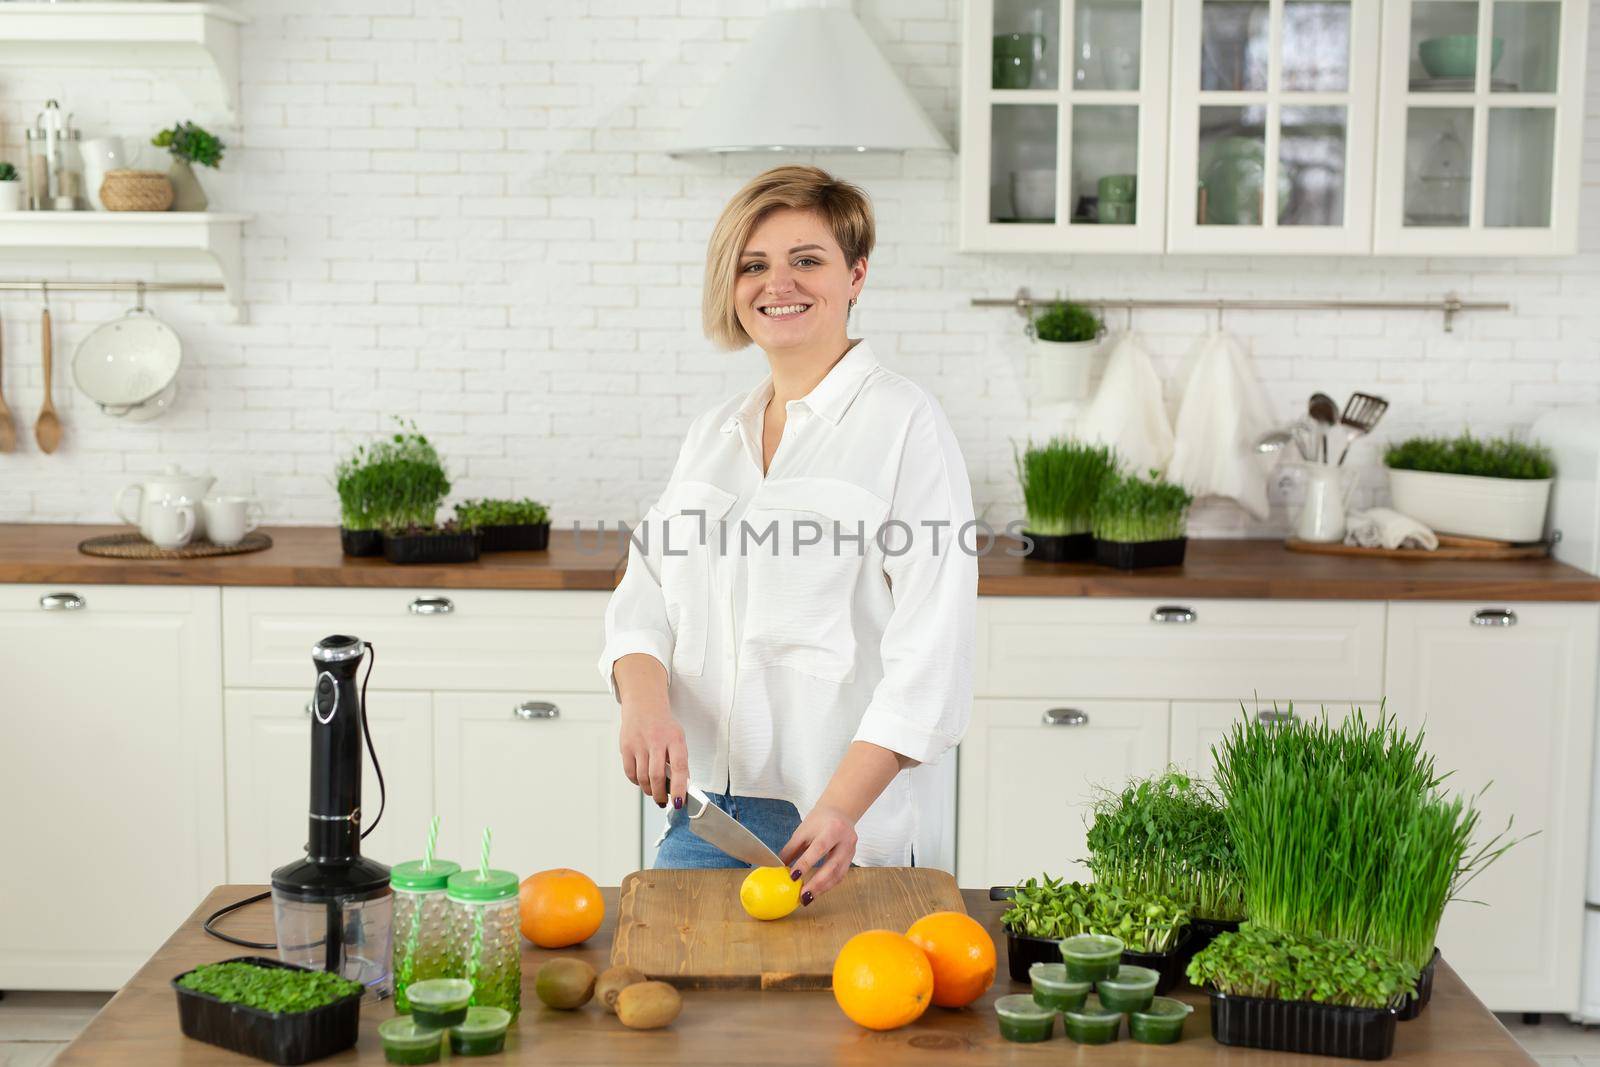 Young beautiful woman cuts a lemon in the kitchen on the table for a vitamin smoothie made of microgreen and fruit.